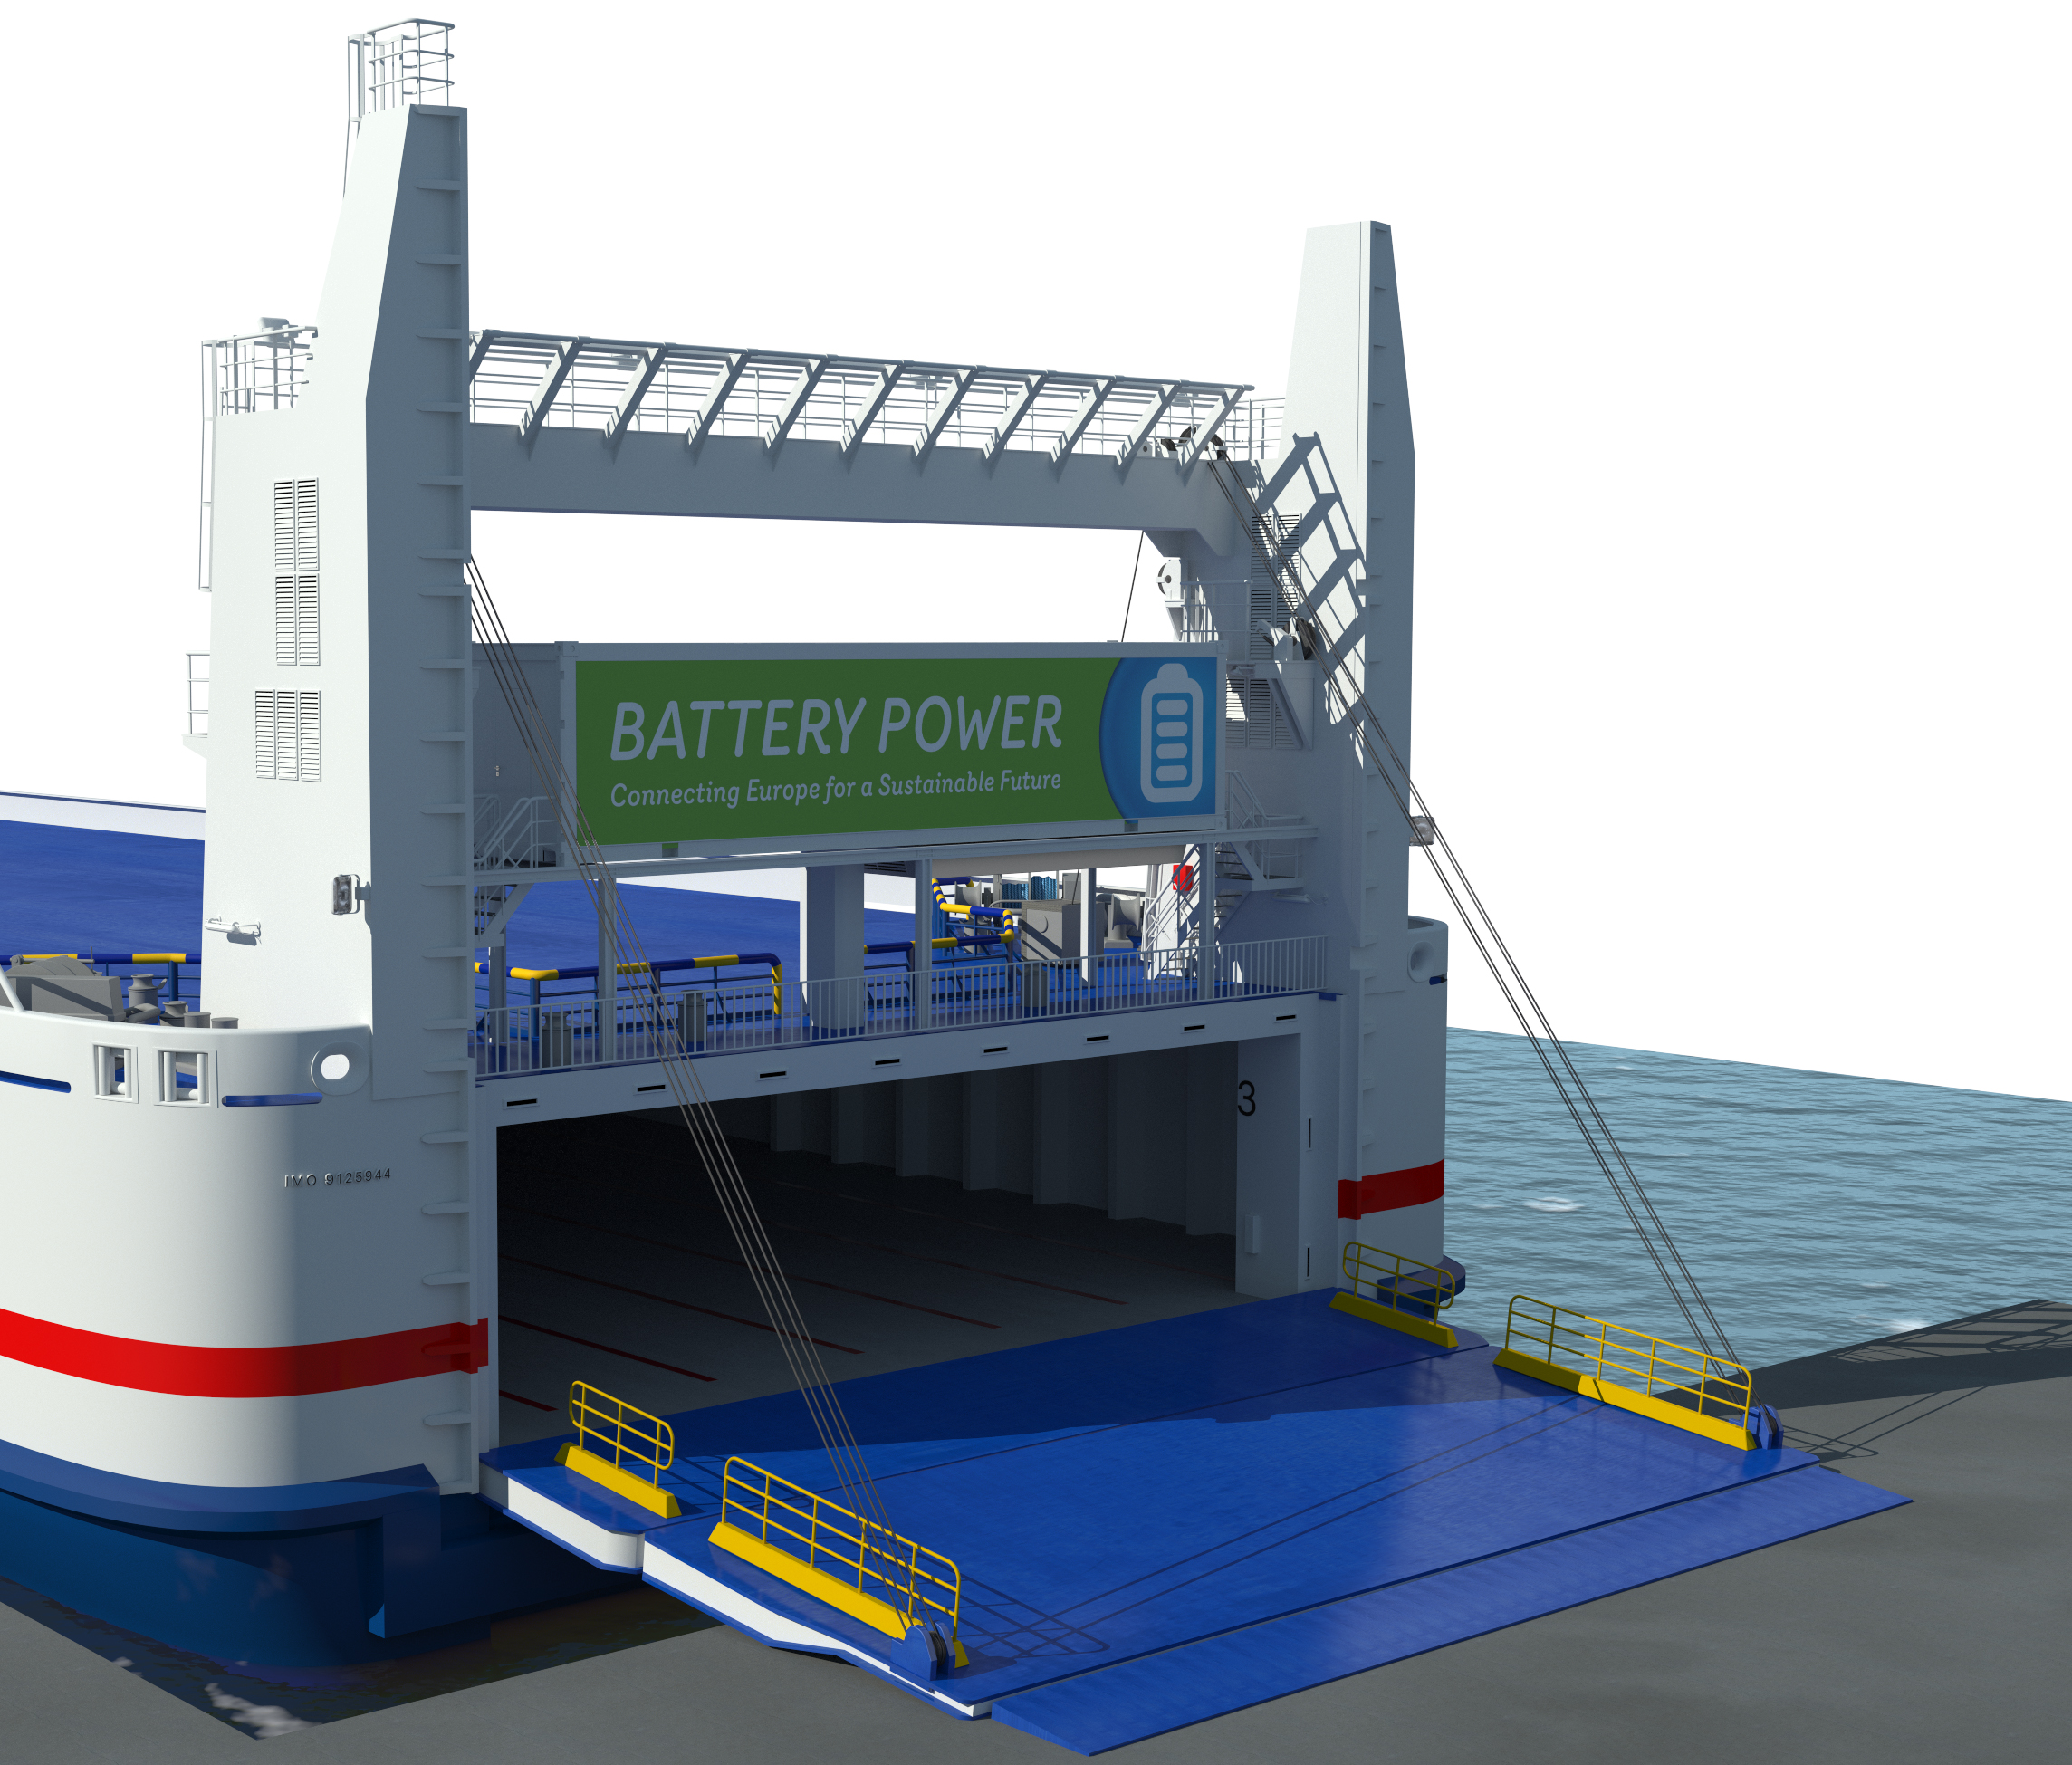 Stena Line launches battery powered ferry service